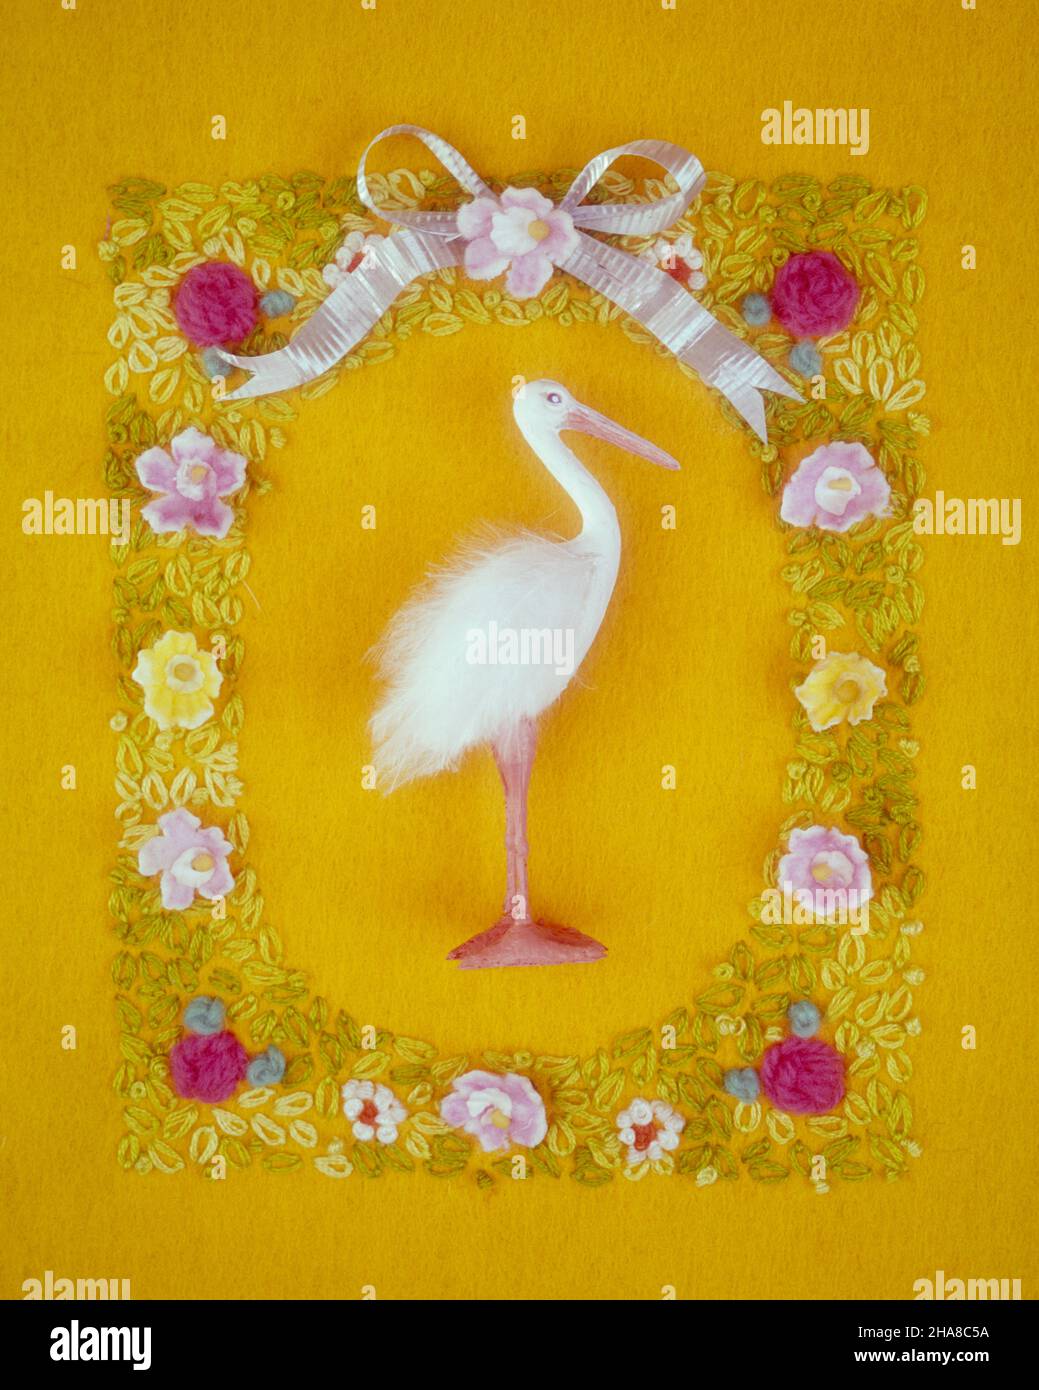 1960s WHITE STORK FIGURE AMID WAX AND EMBROIDERED FLOWERS ON YELLOW FELT TEXTILE SYMBOLIC CHILD BIRTH STILL LIFE ART - ks9325 PHT001 HARS STILL LIFE ANNOUNCEMENT FELT IMAGINATION SYMBOLIC ARRIVAL BIRTH CONCEPTS CREATIVITY FEATHERED WINGED AMID BABY GIRL COMPOSITION EMBROIDERED ICONIC LEGEND OLD FASHIONED REPRESENTATION Stock Photo